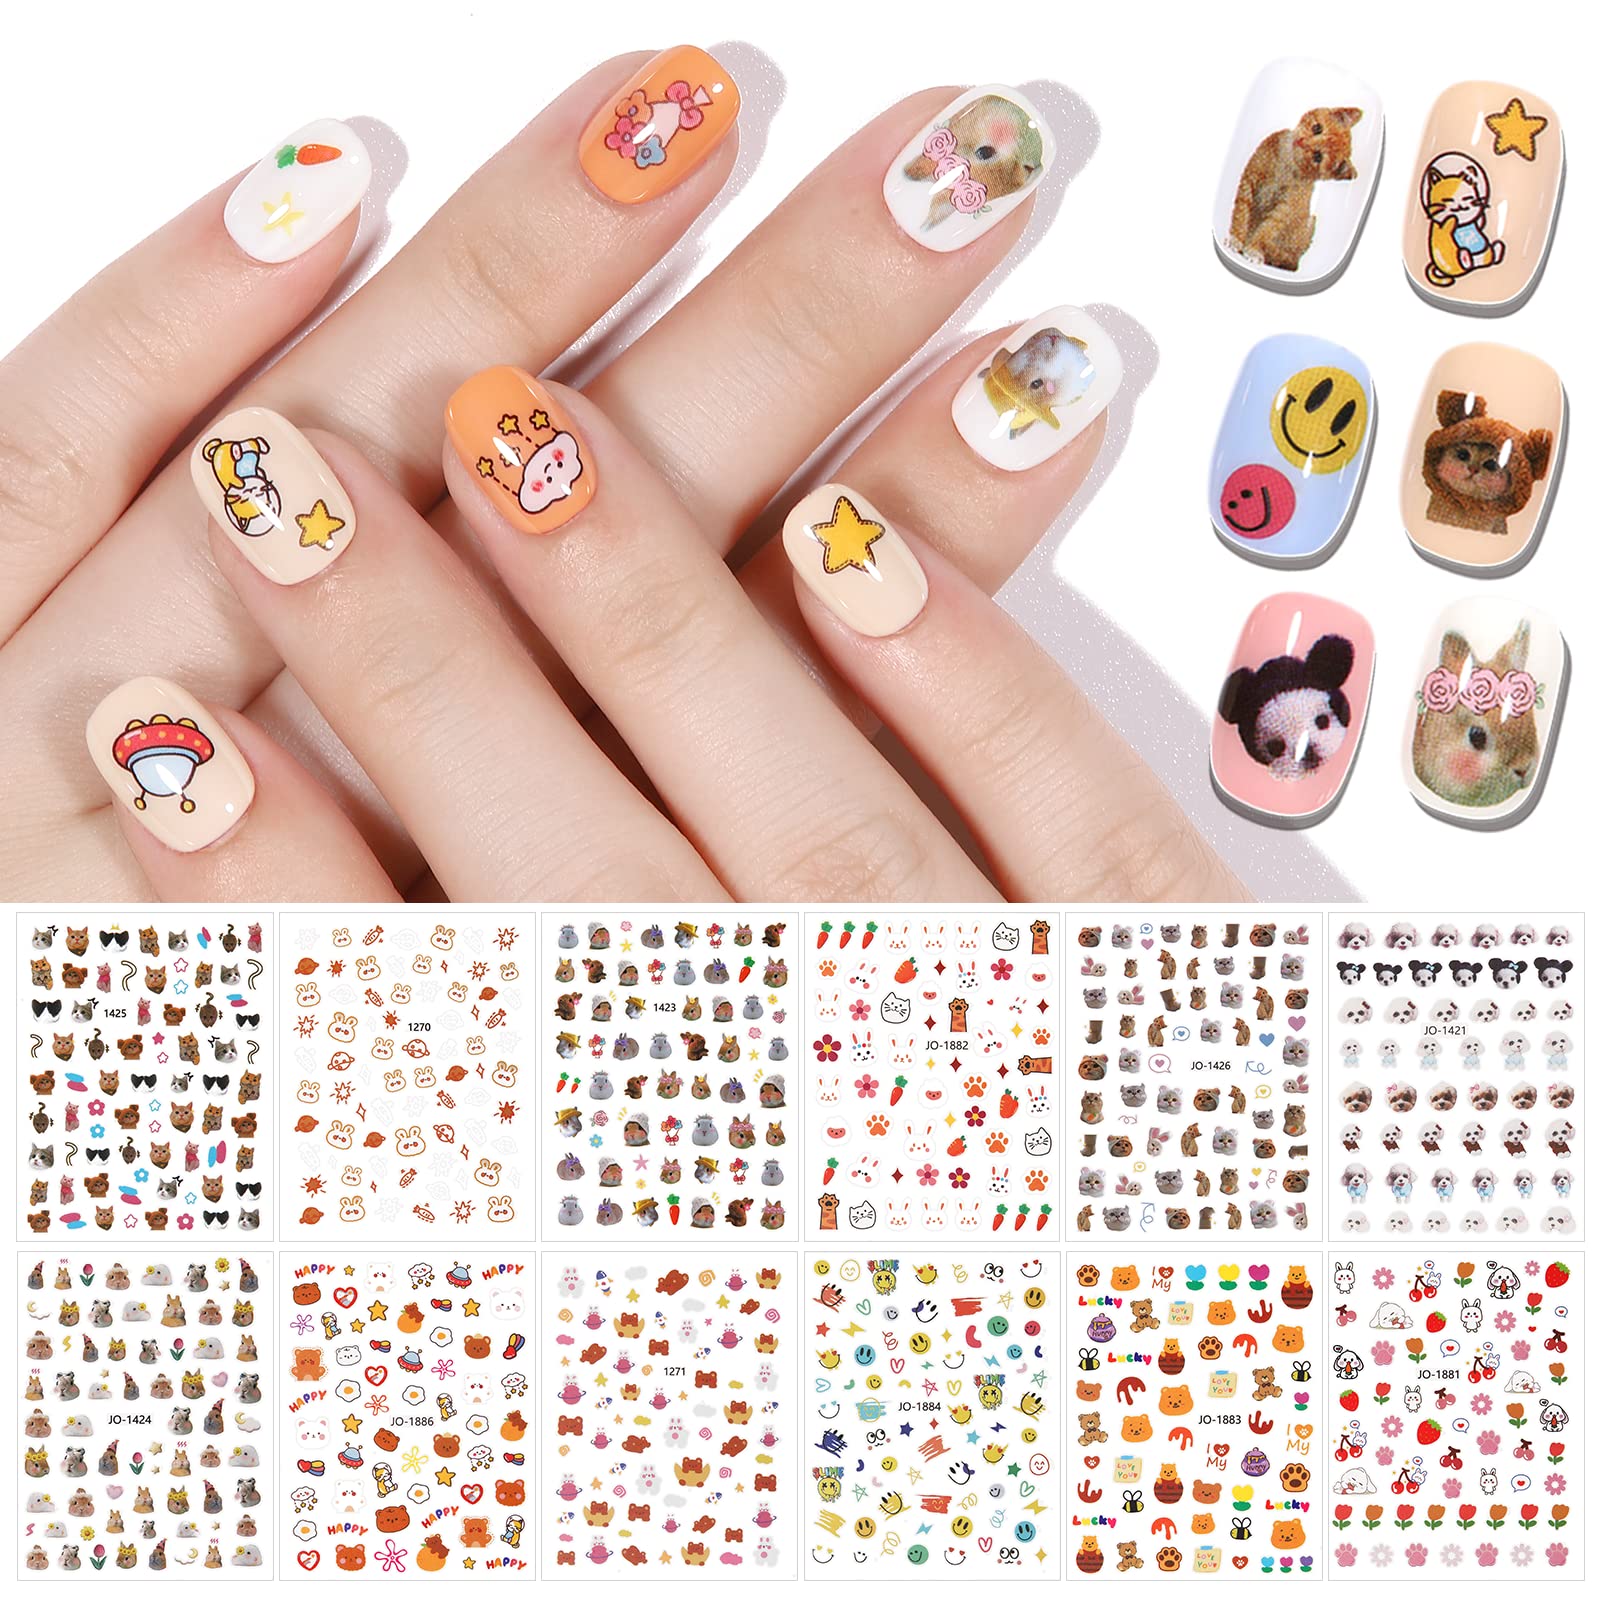 TOMICCA Nail Stickers for Kids - Nail Art Stickers, 12 Sheets Cute